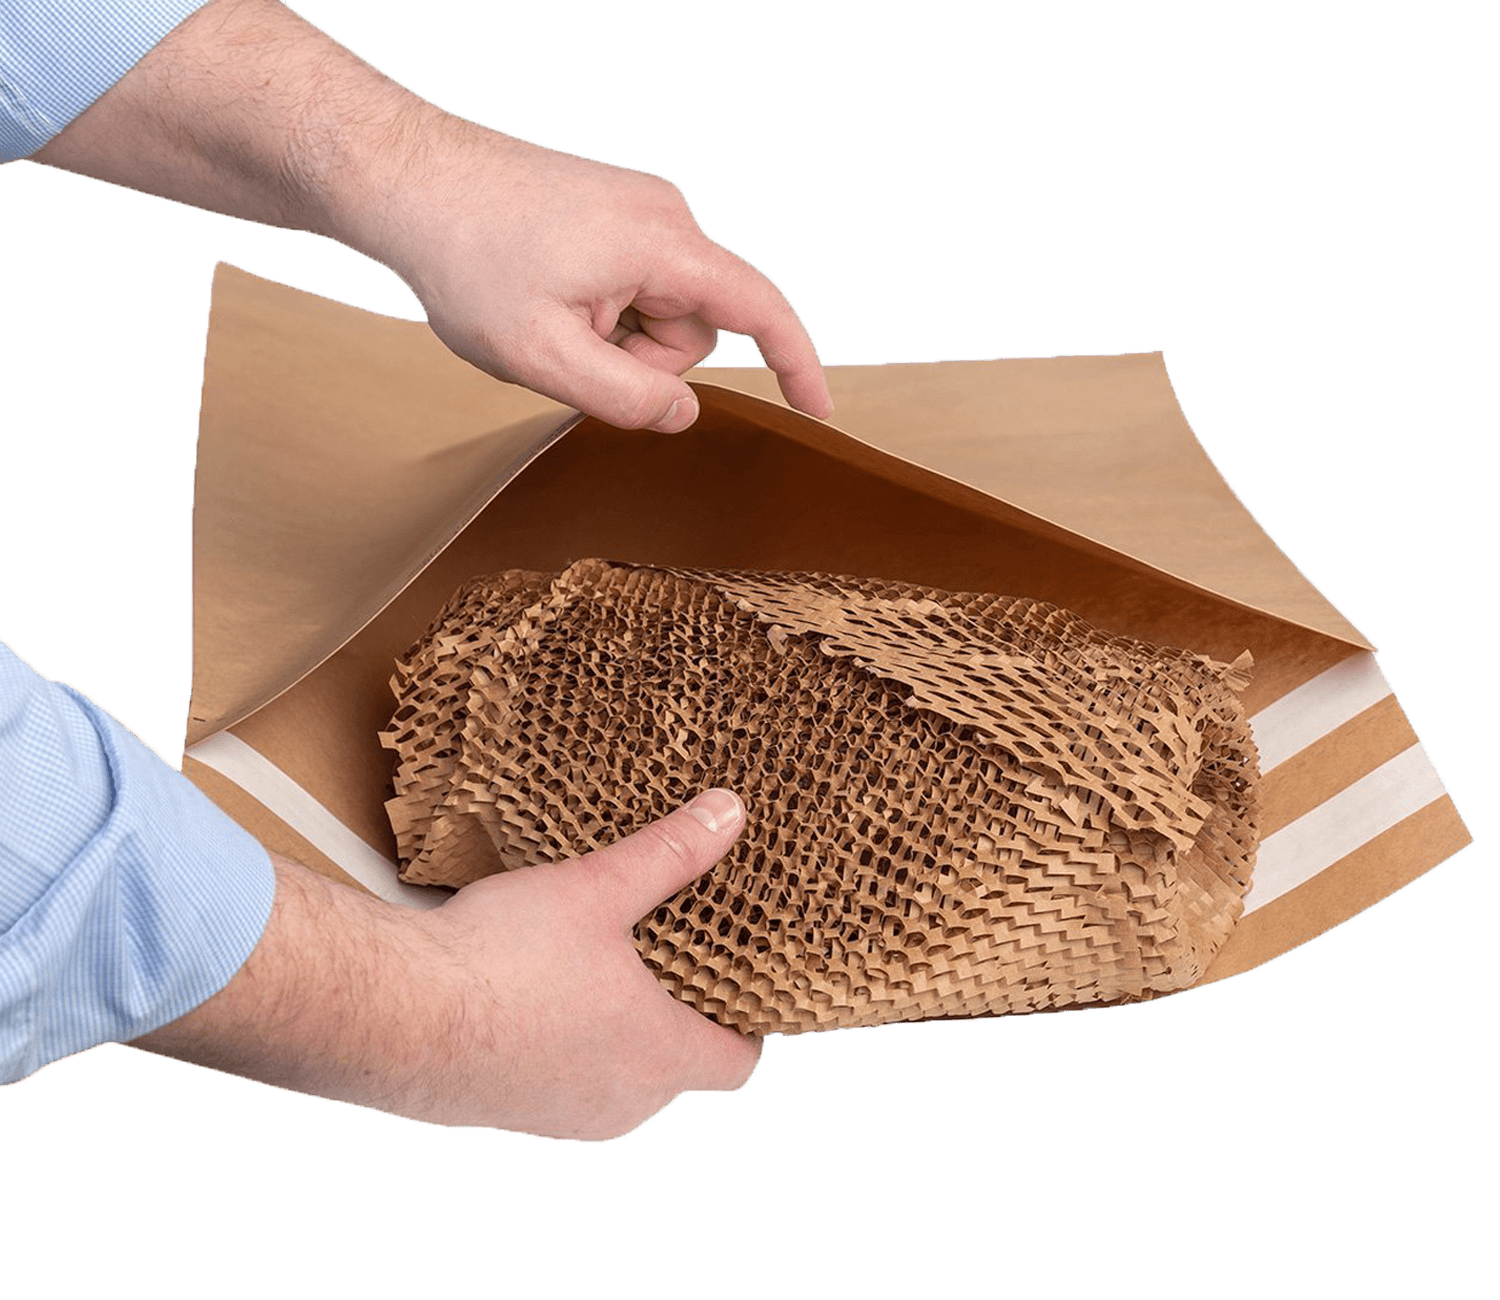 15+ Types of Packaging Foam: Safeguarding Your Shipments – Arka